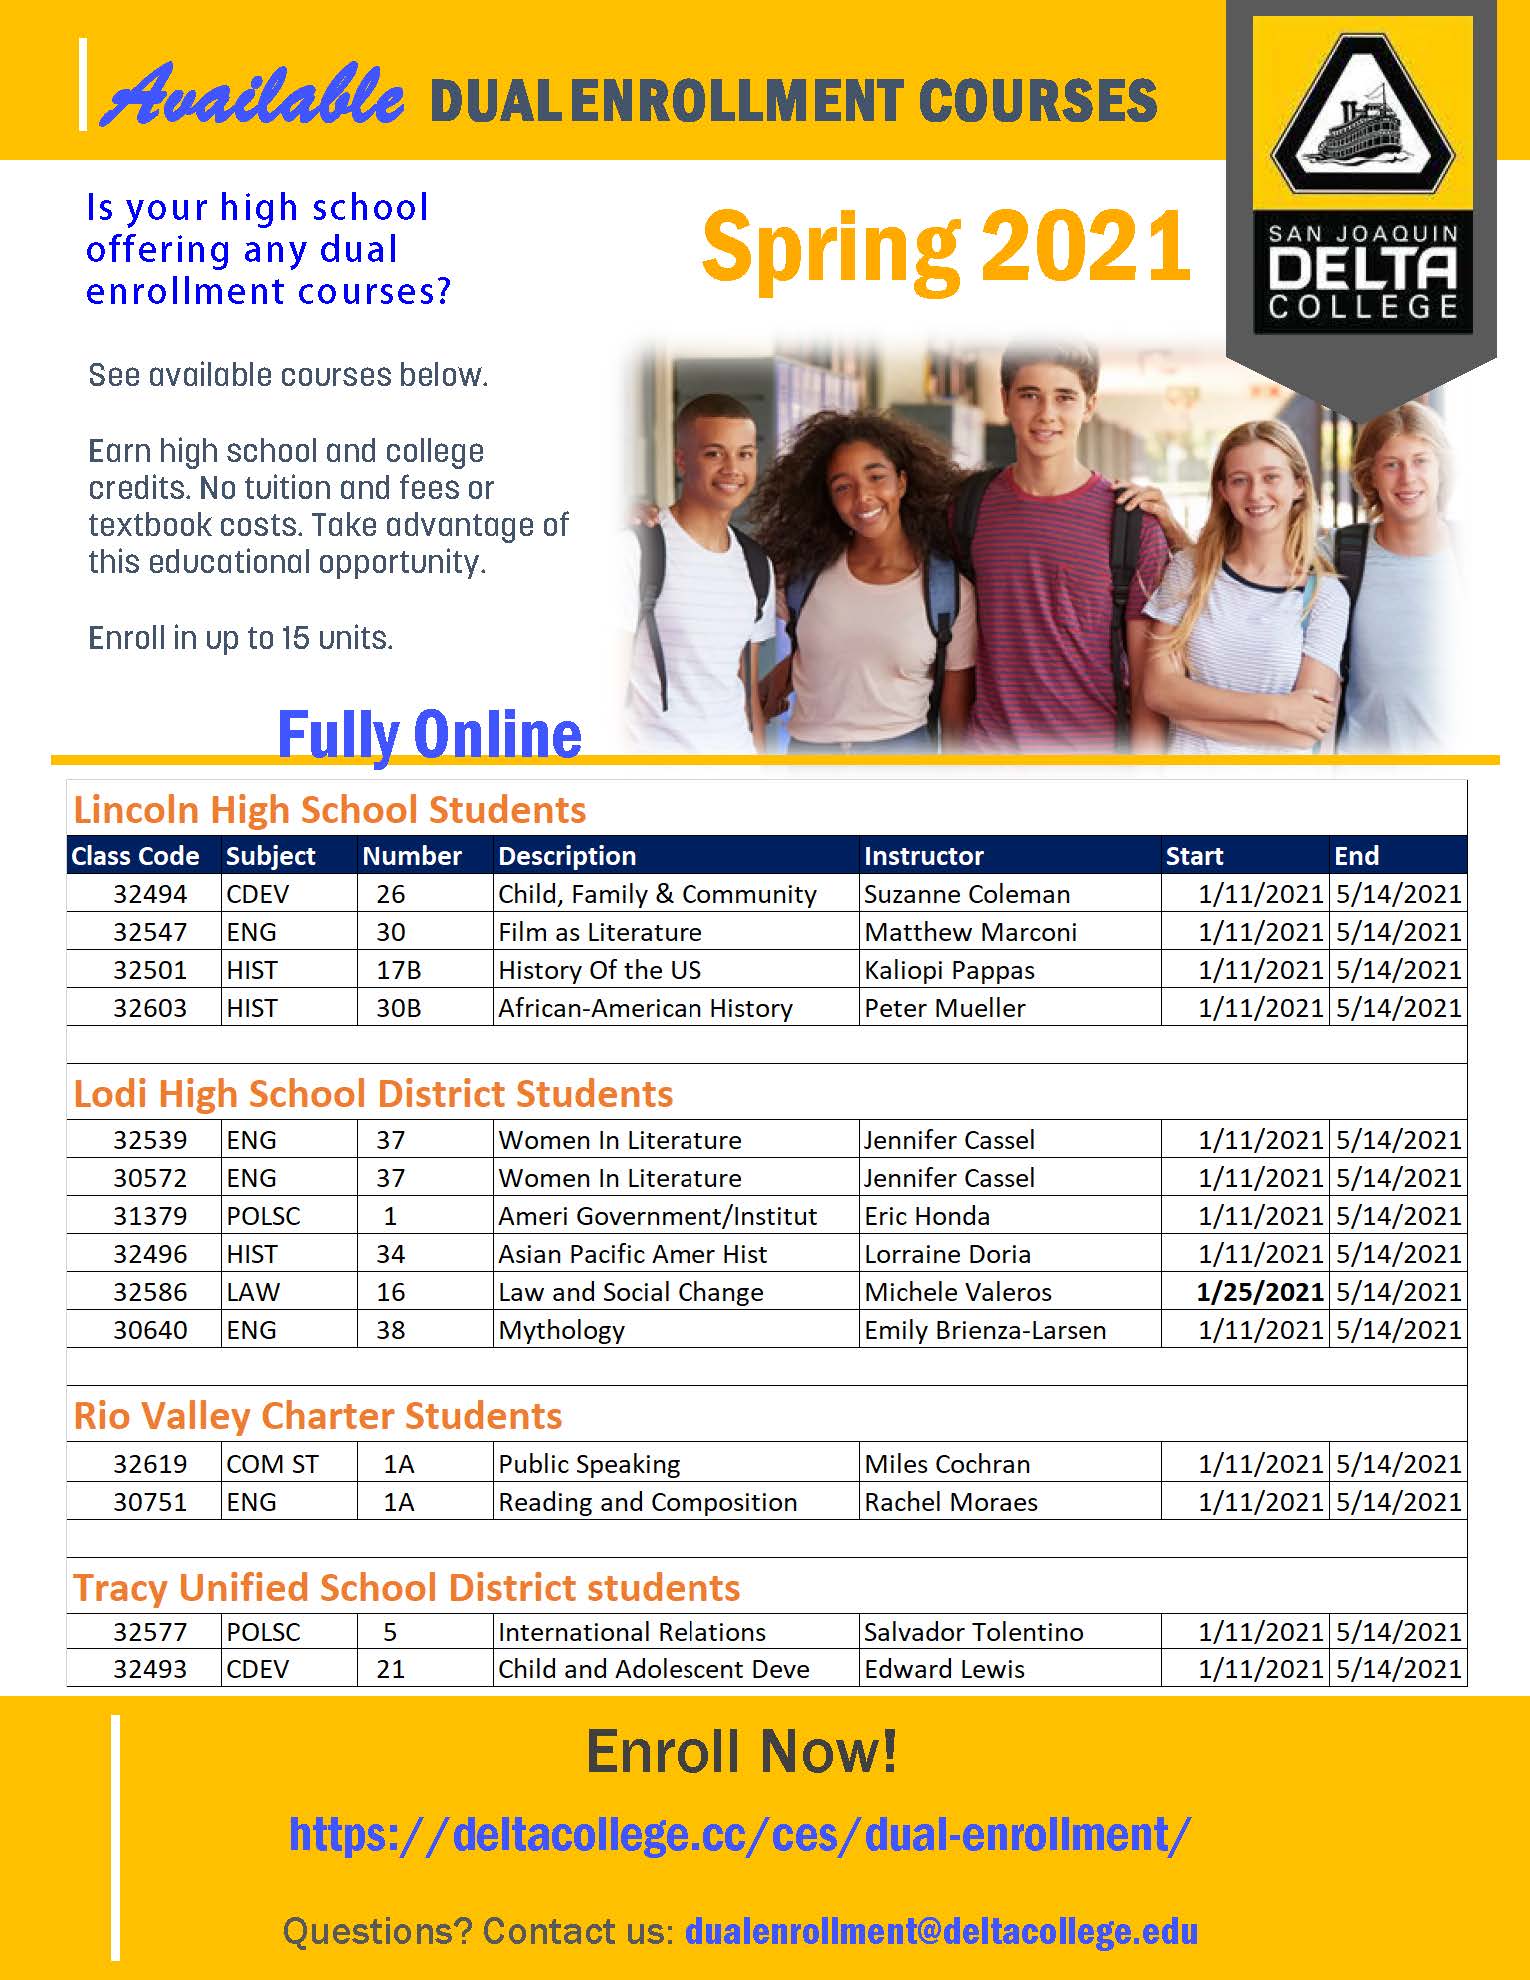 Free Delta courses for high school students this spring San Joaquin